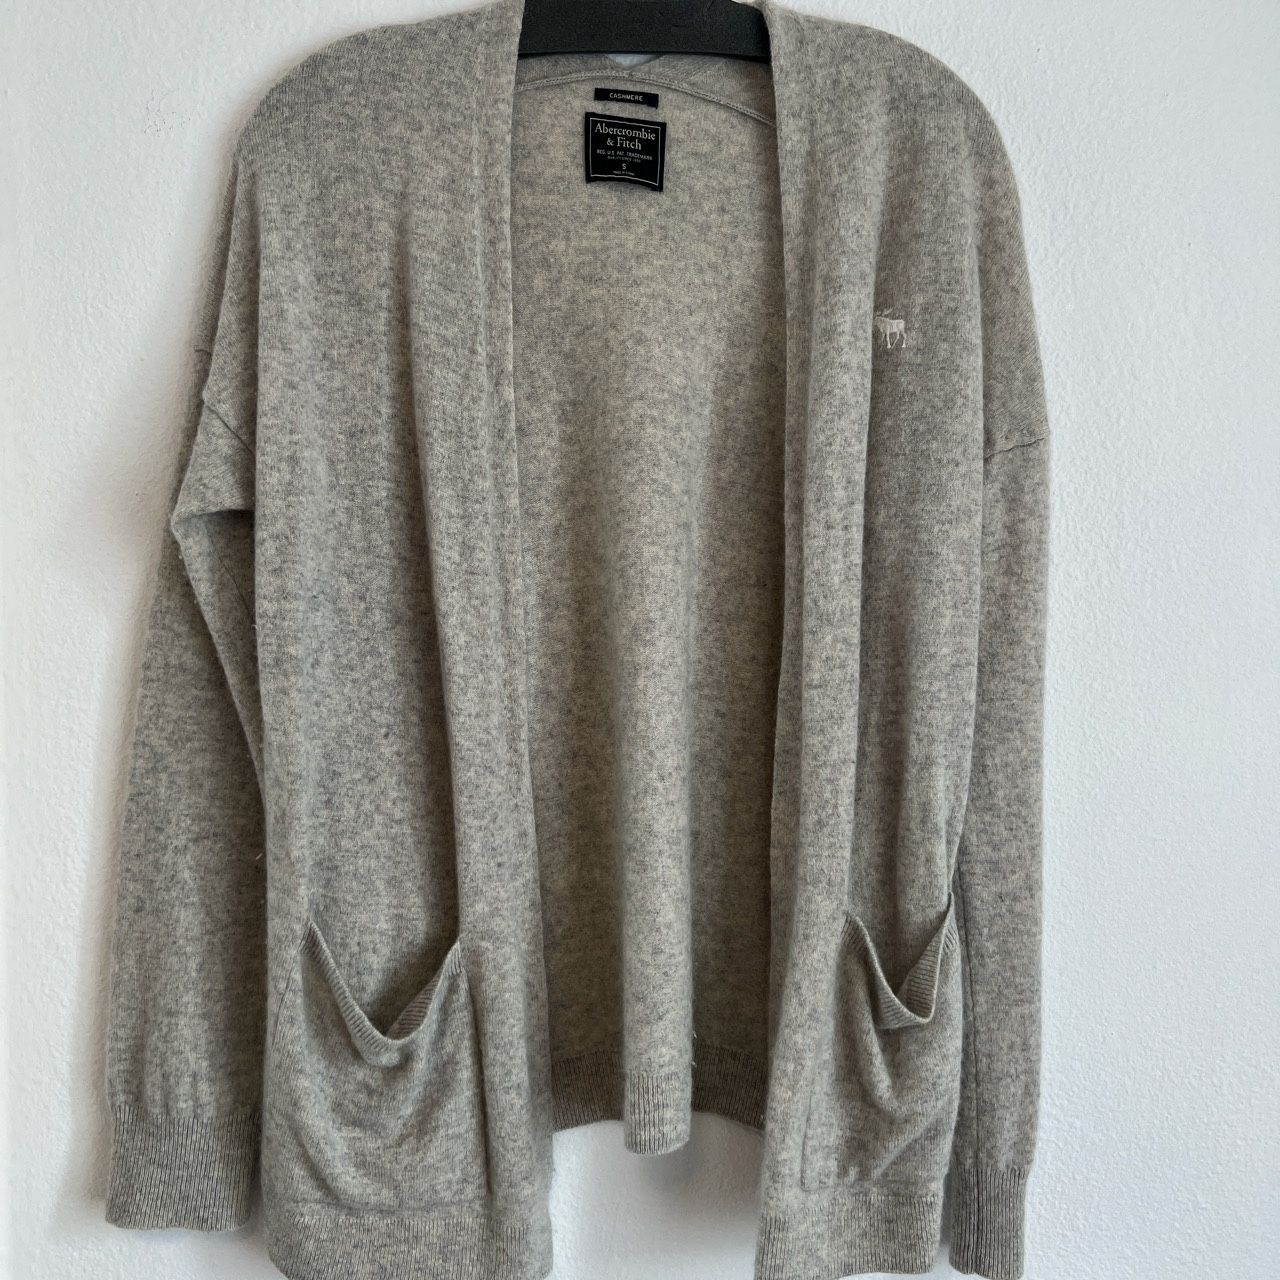 Abercrombie & Fitch Cashmere Cardigan 